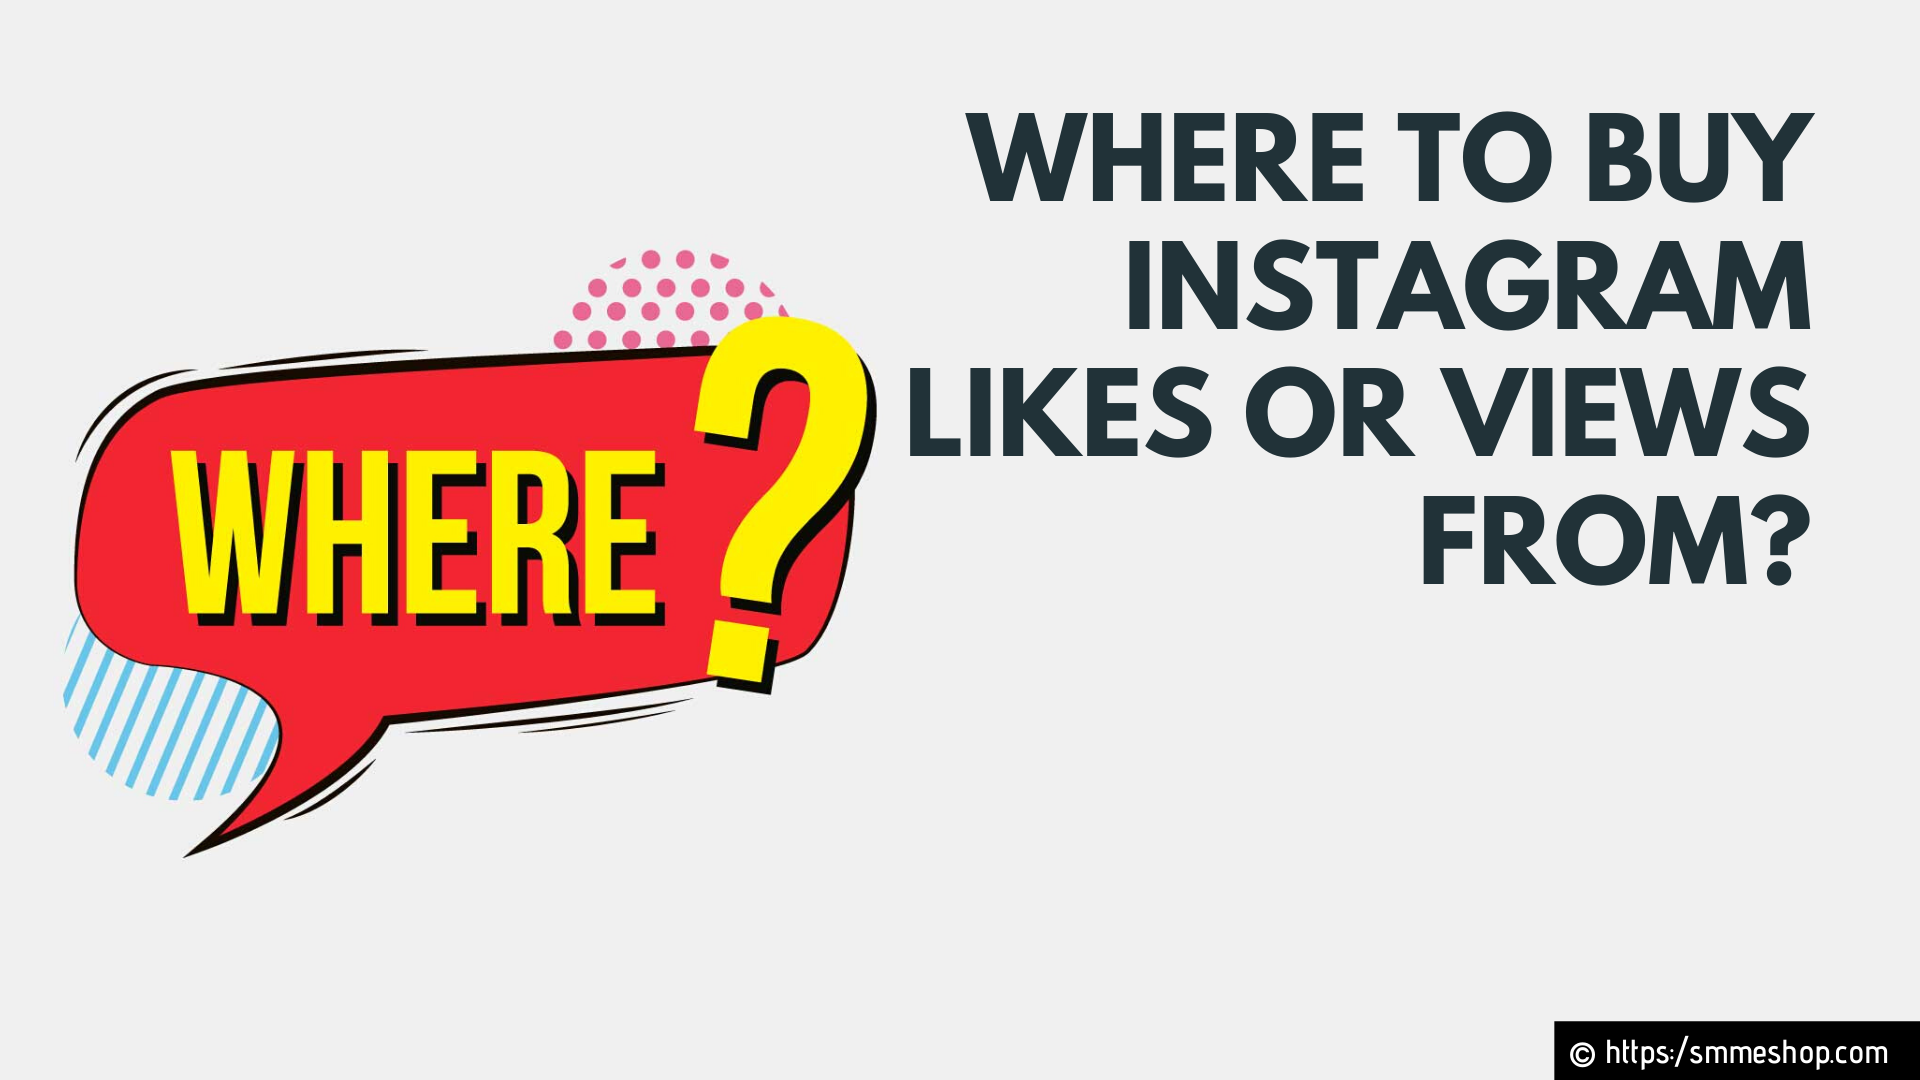 Where to Buy Instagram Likes or Views from?